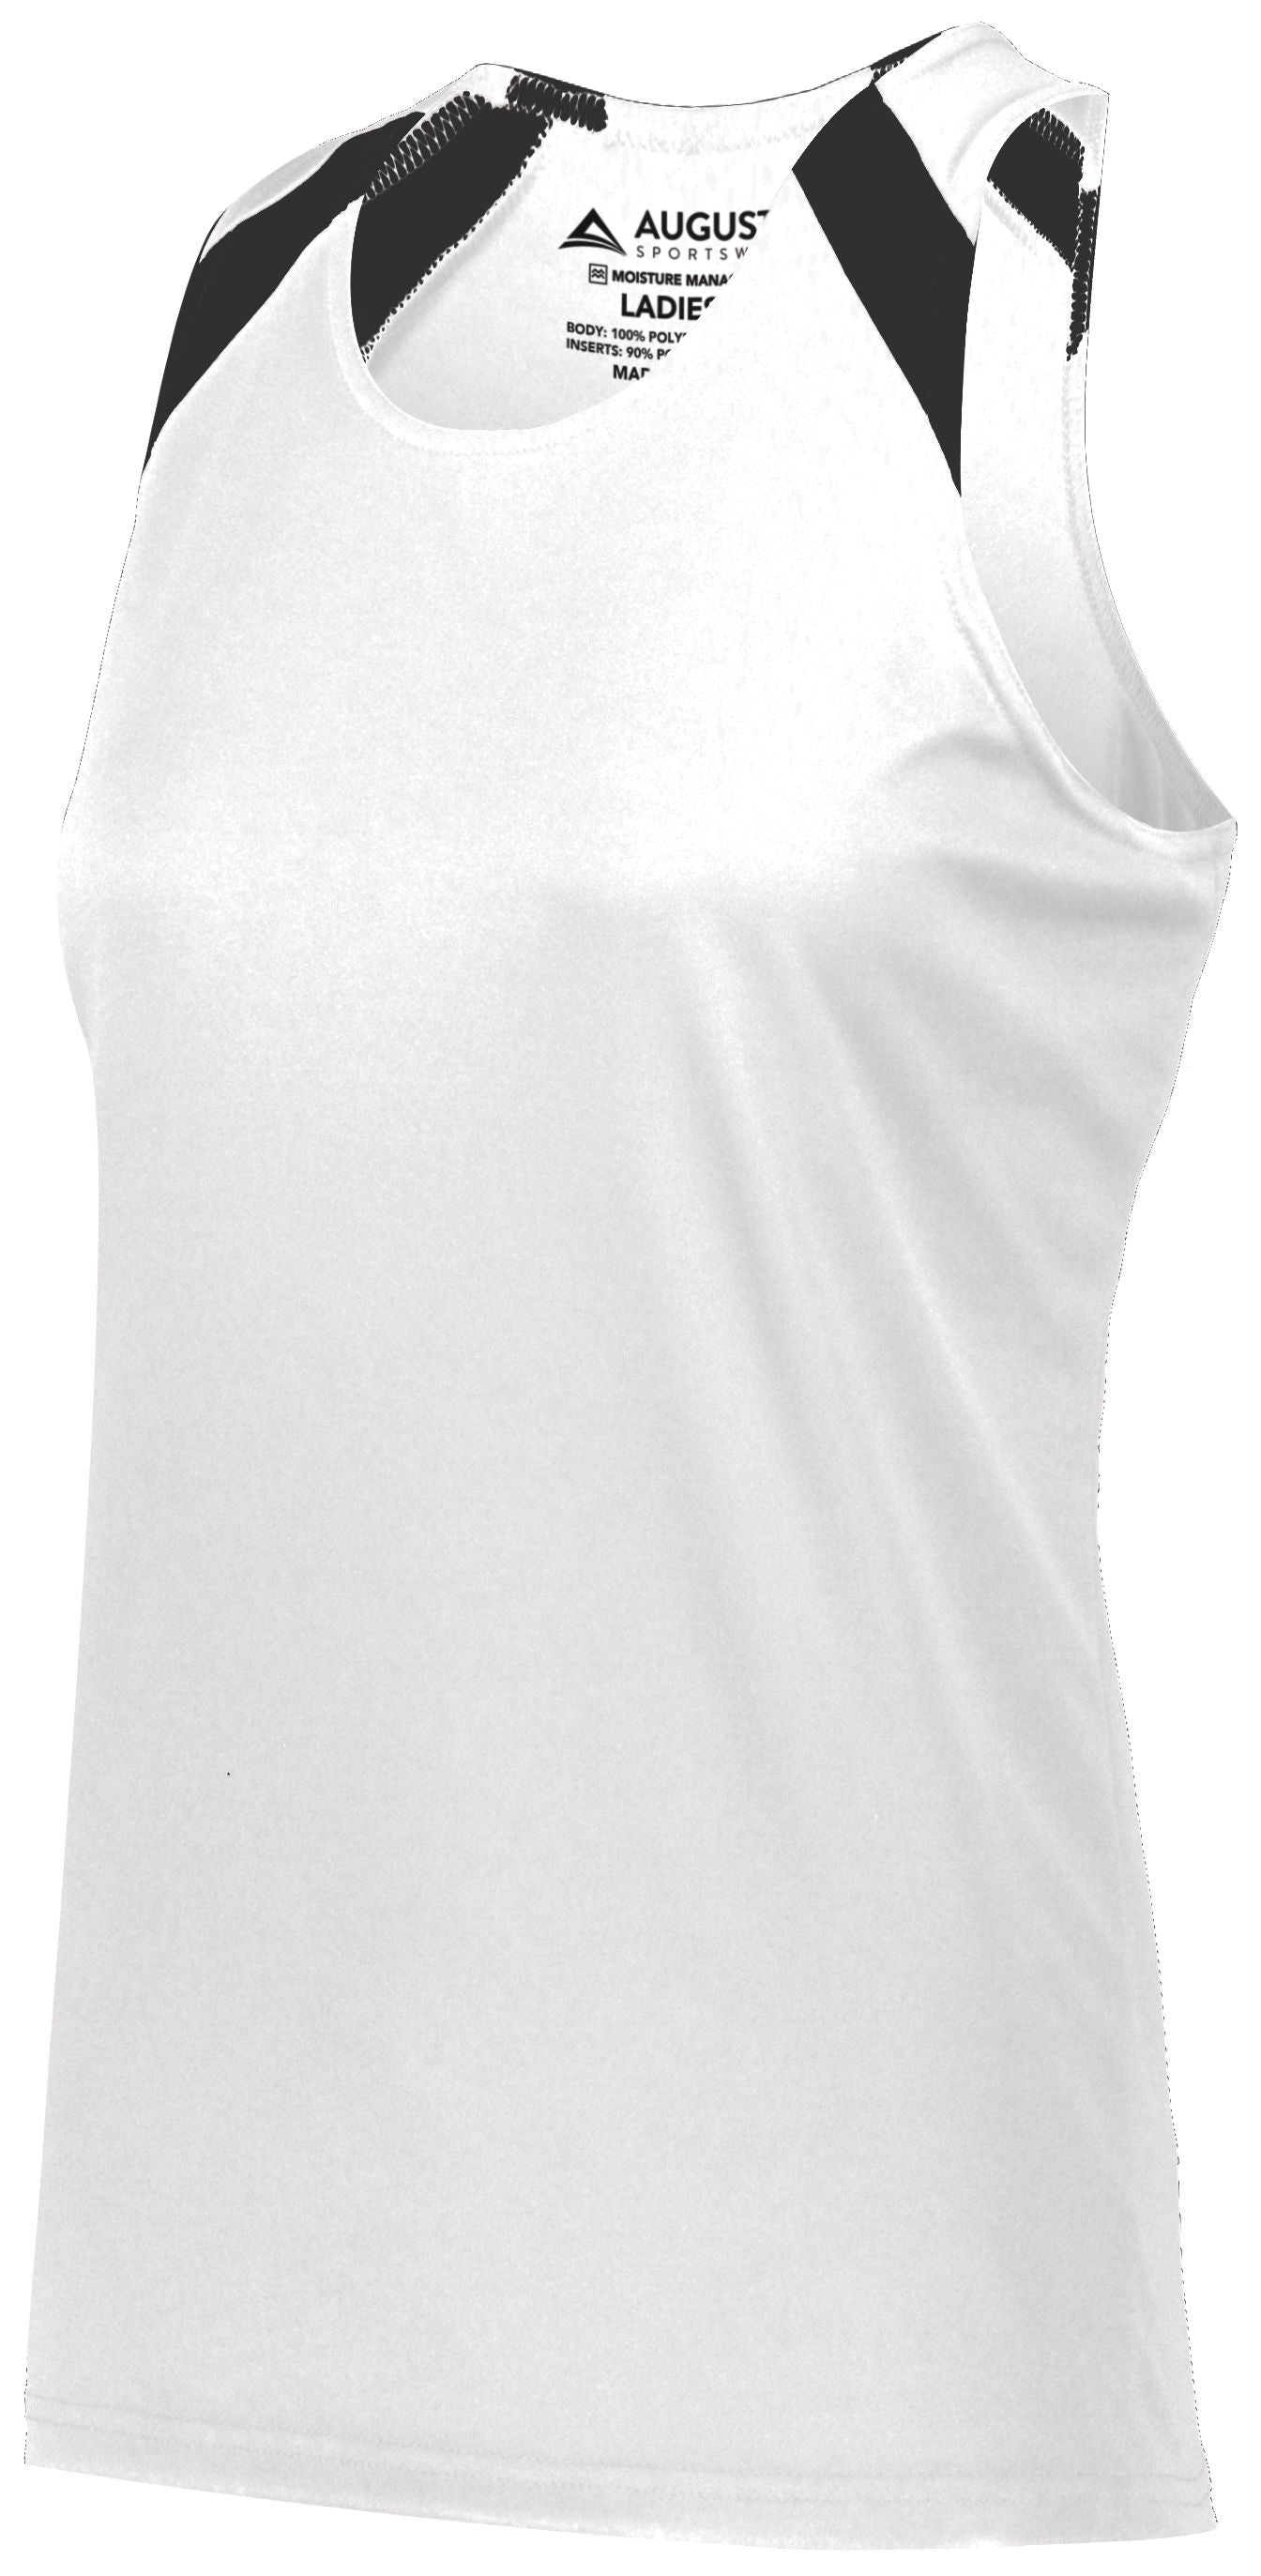 Augusta Sportswear Ladies Overspeed Track Jersey in White/Black  -Part of the Ladies, Ladies-Jersey, Augusta-Products, Track-Field, Shirts product lines at KanaleyCreations.com